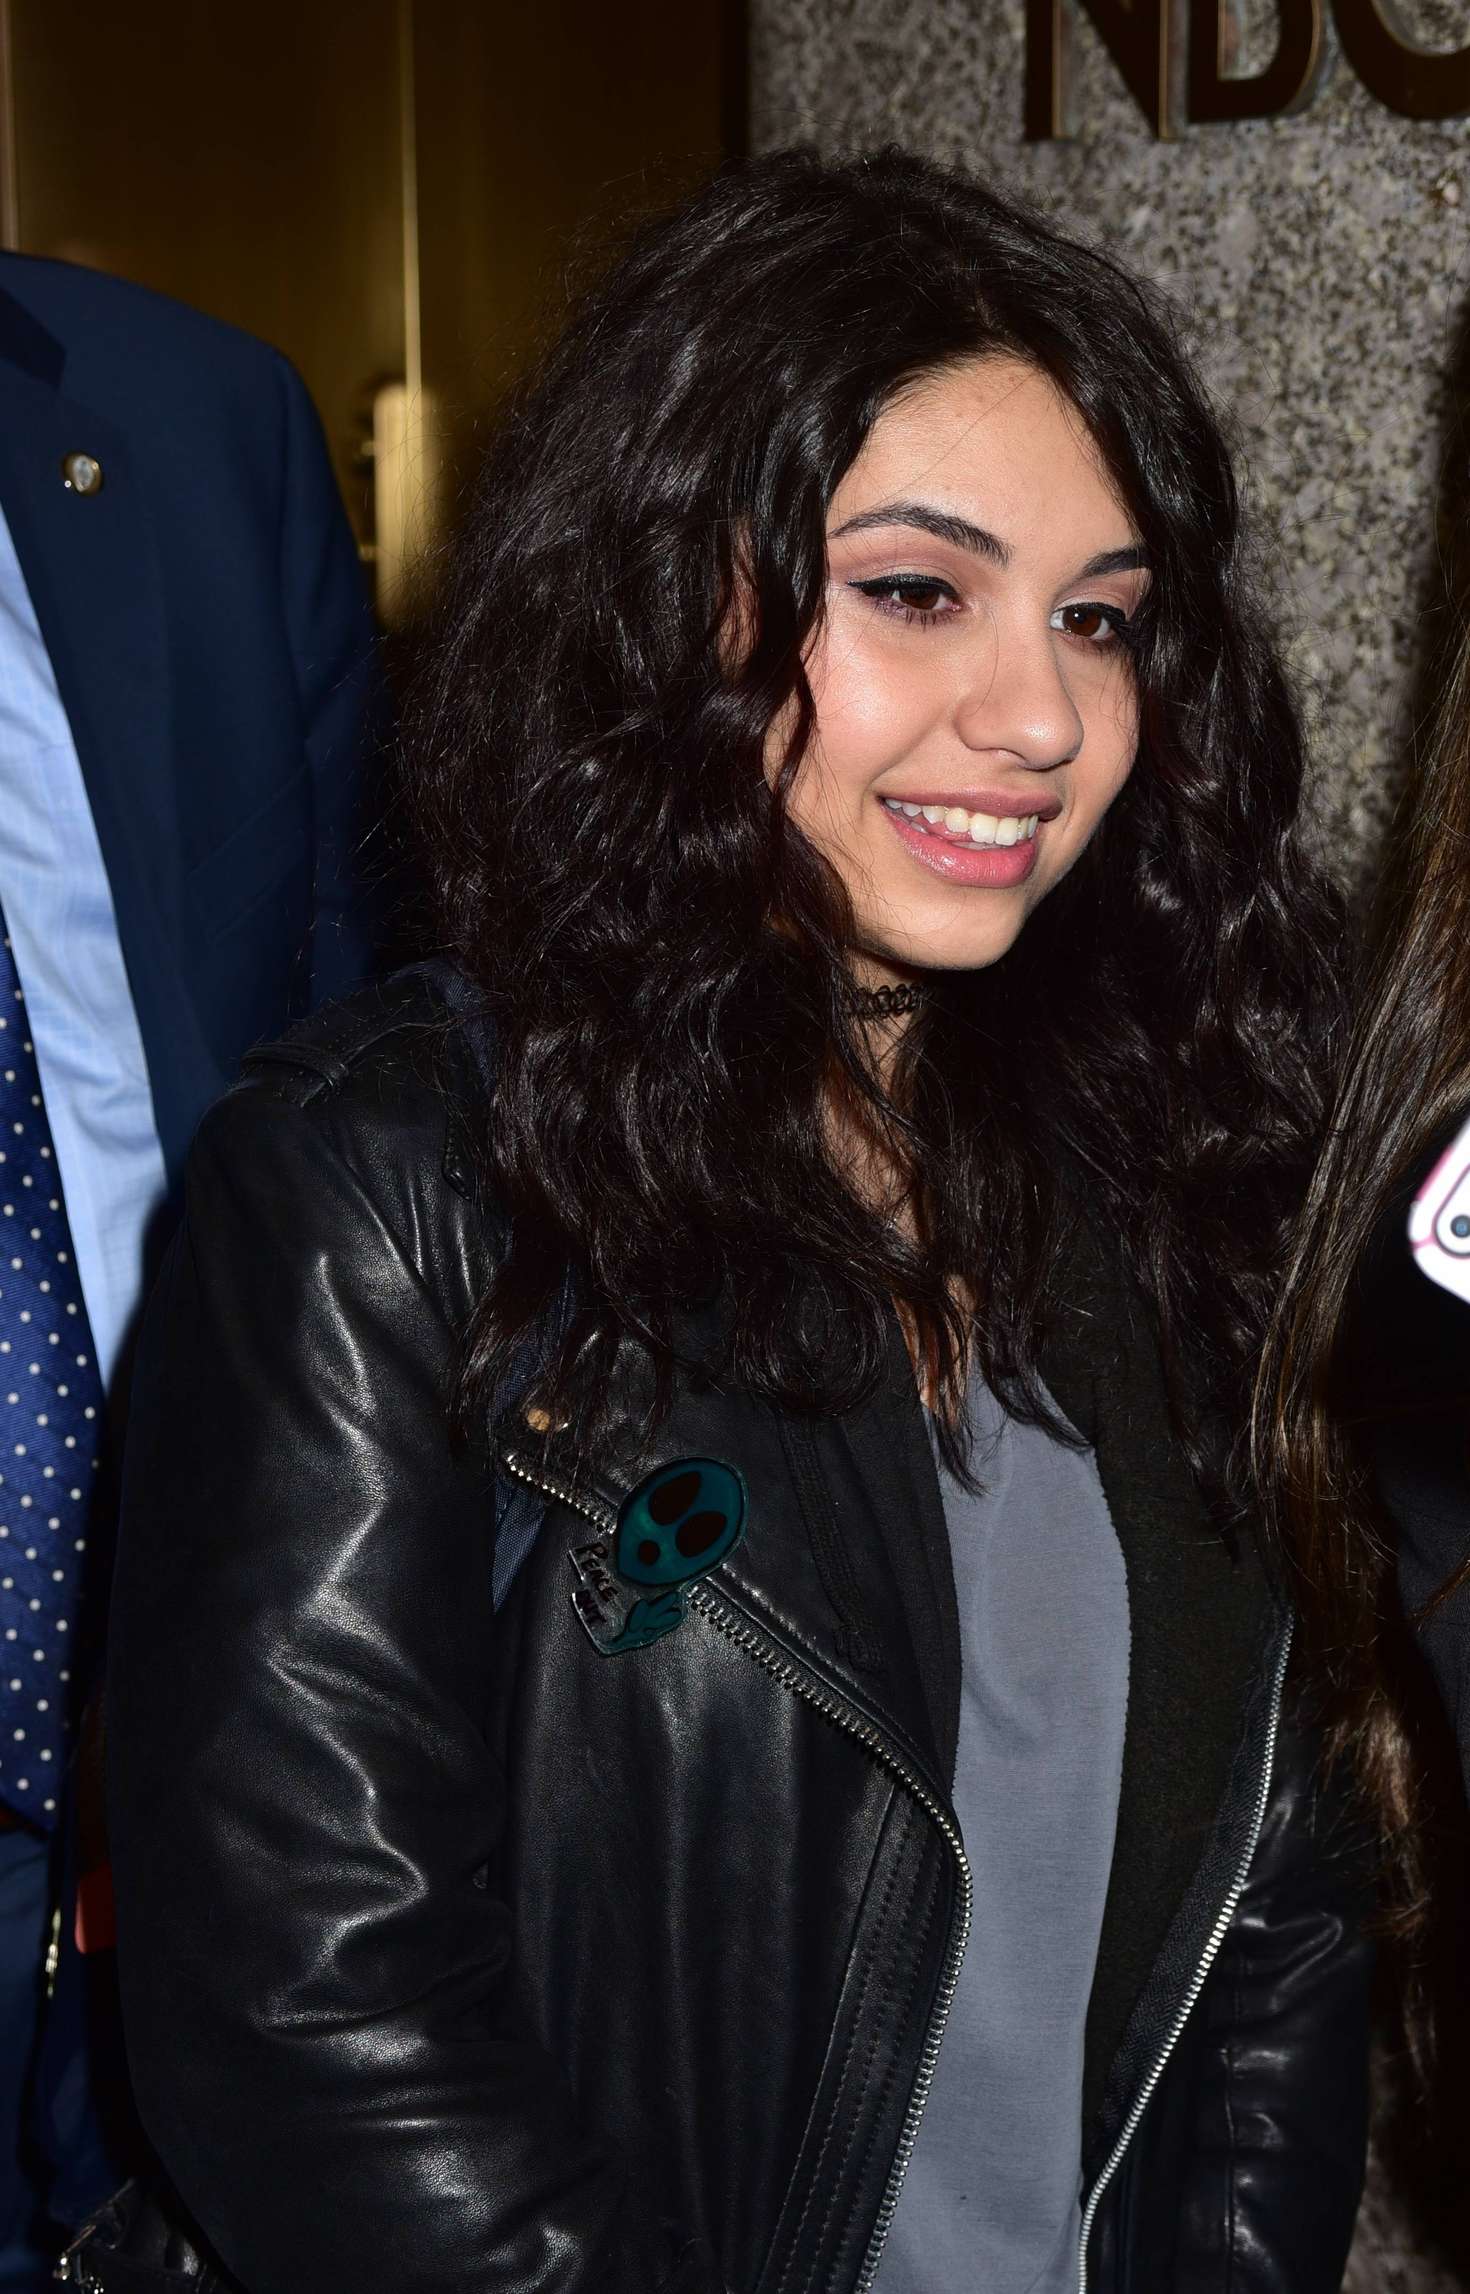 Alessia Cara Leaving The Tonight Show Starring Jimmy Fallon in New York